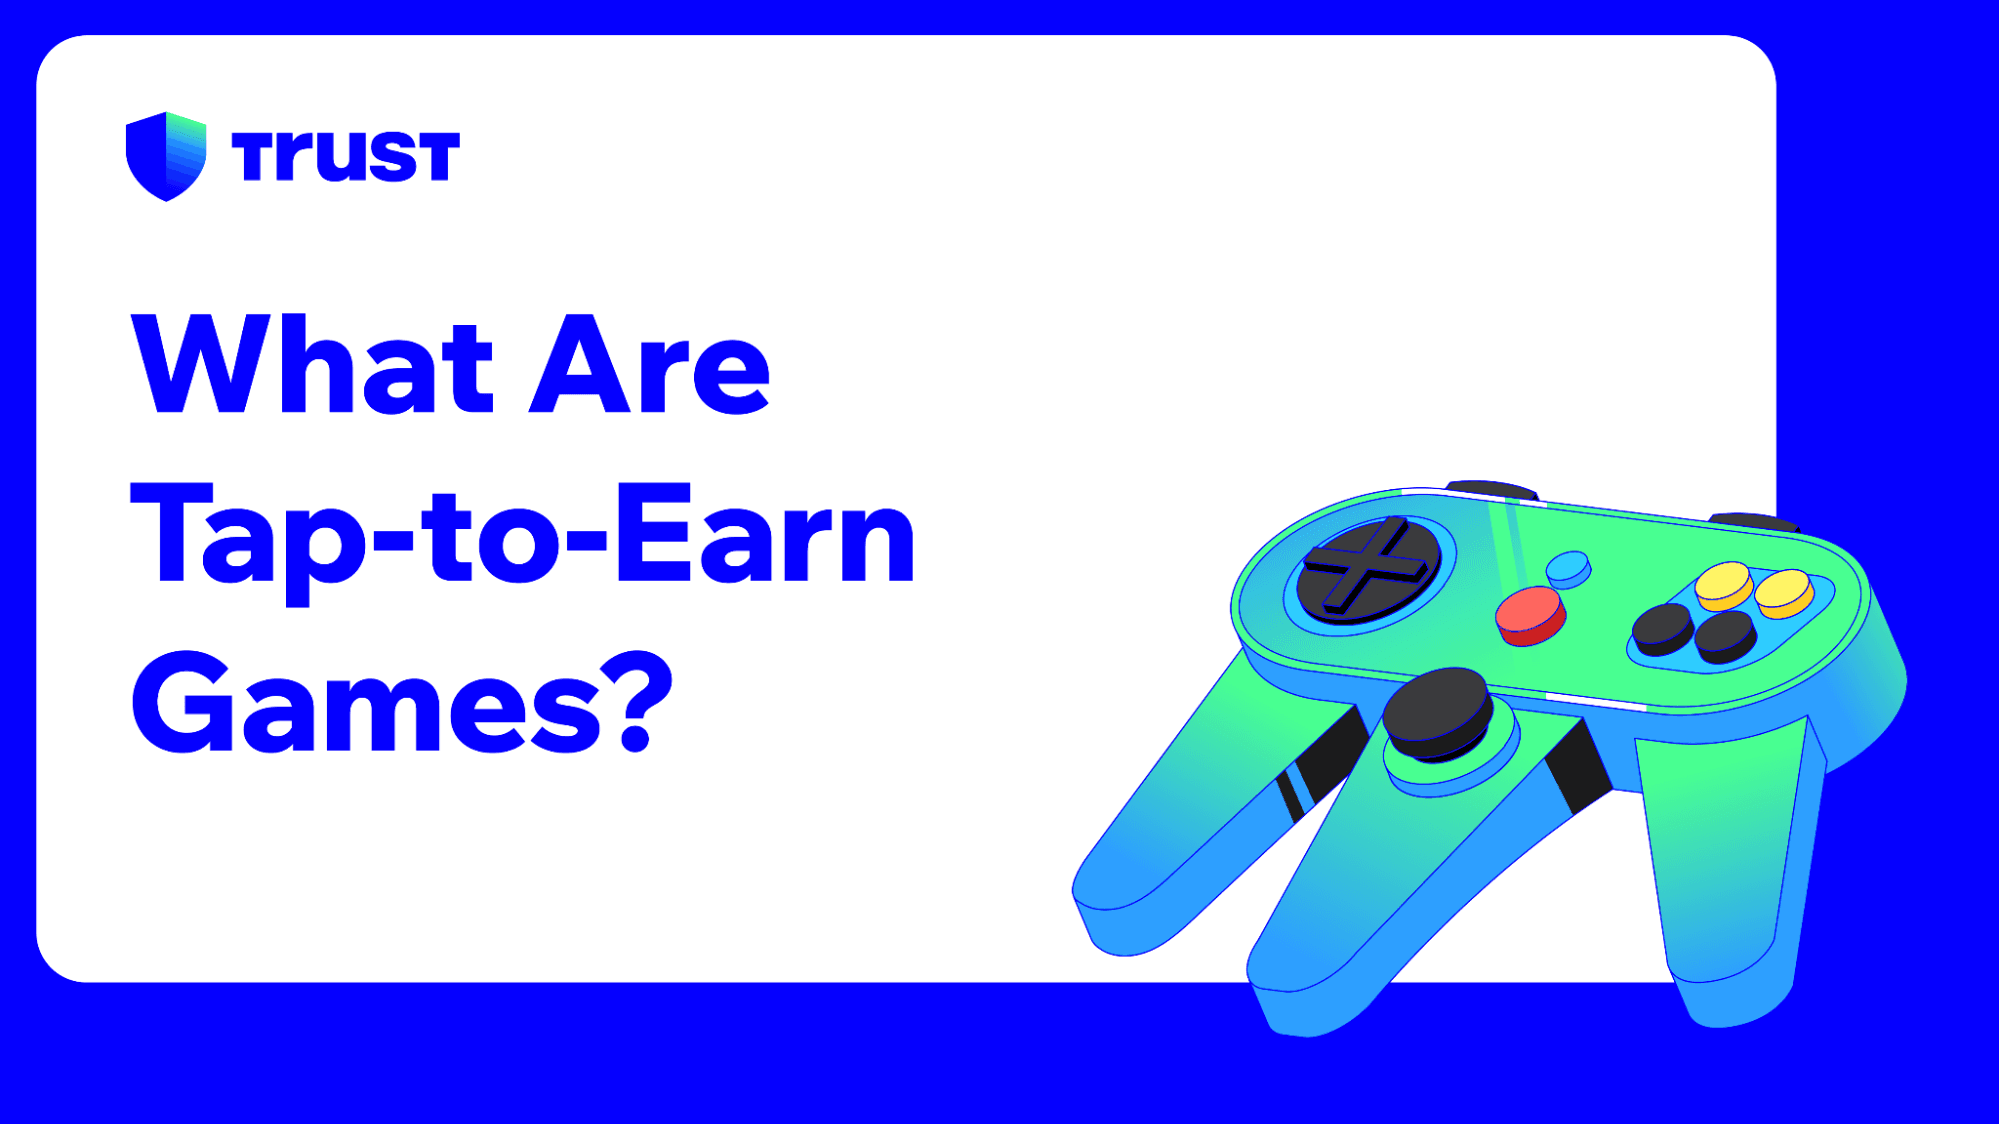 What Are Tap-to-Earn Games?